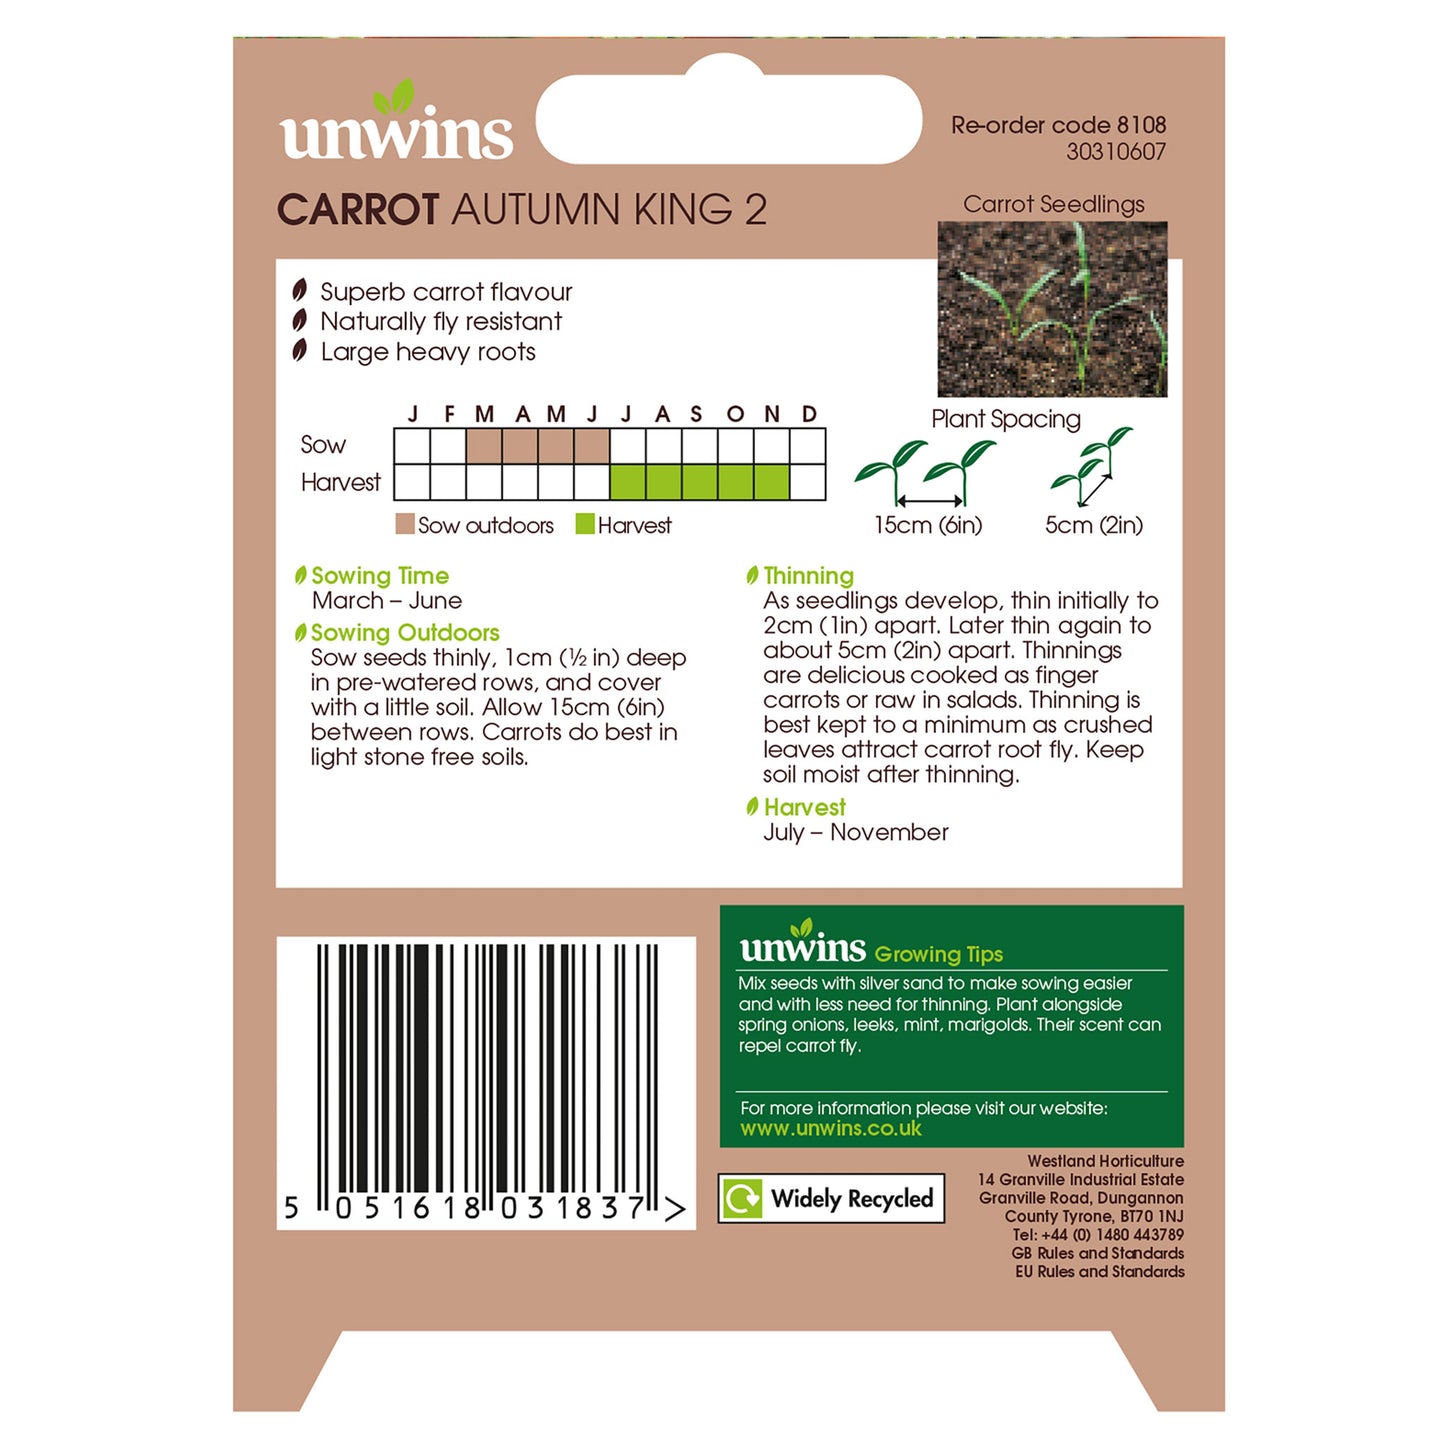 Unwins Carrot Autumn King 2 Seeds back of pack